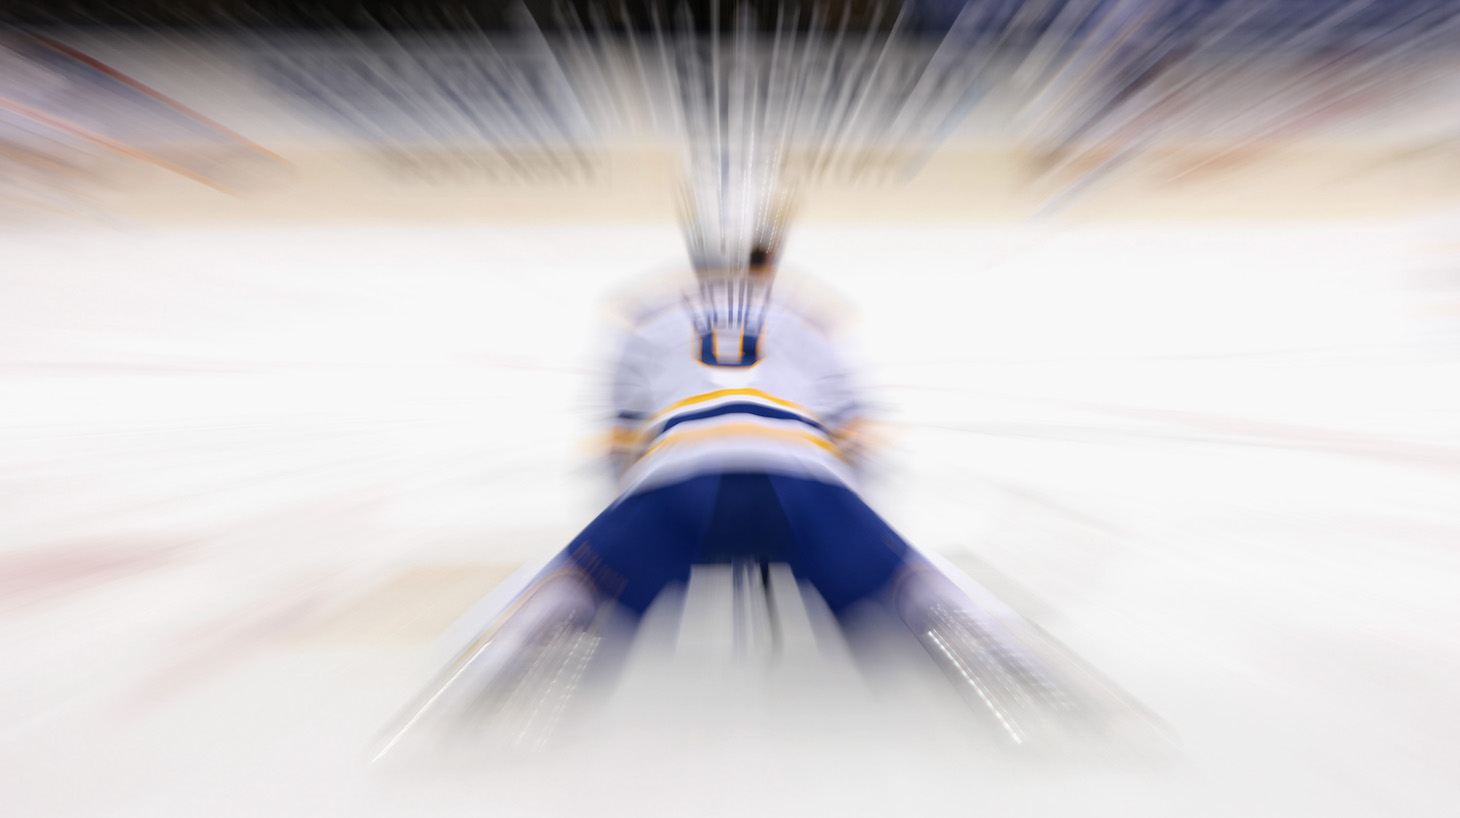 NEW YORK, NEW YORK - MARCH 02: Jack Eichel #9 of the Buffalo Sabres stretches in warm-ups prior to the game against the New York Rangers at Madison Square Garden on March 02, 2021 in New York City. (Photo by Bruce Bennett/Getty Images)